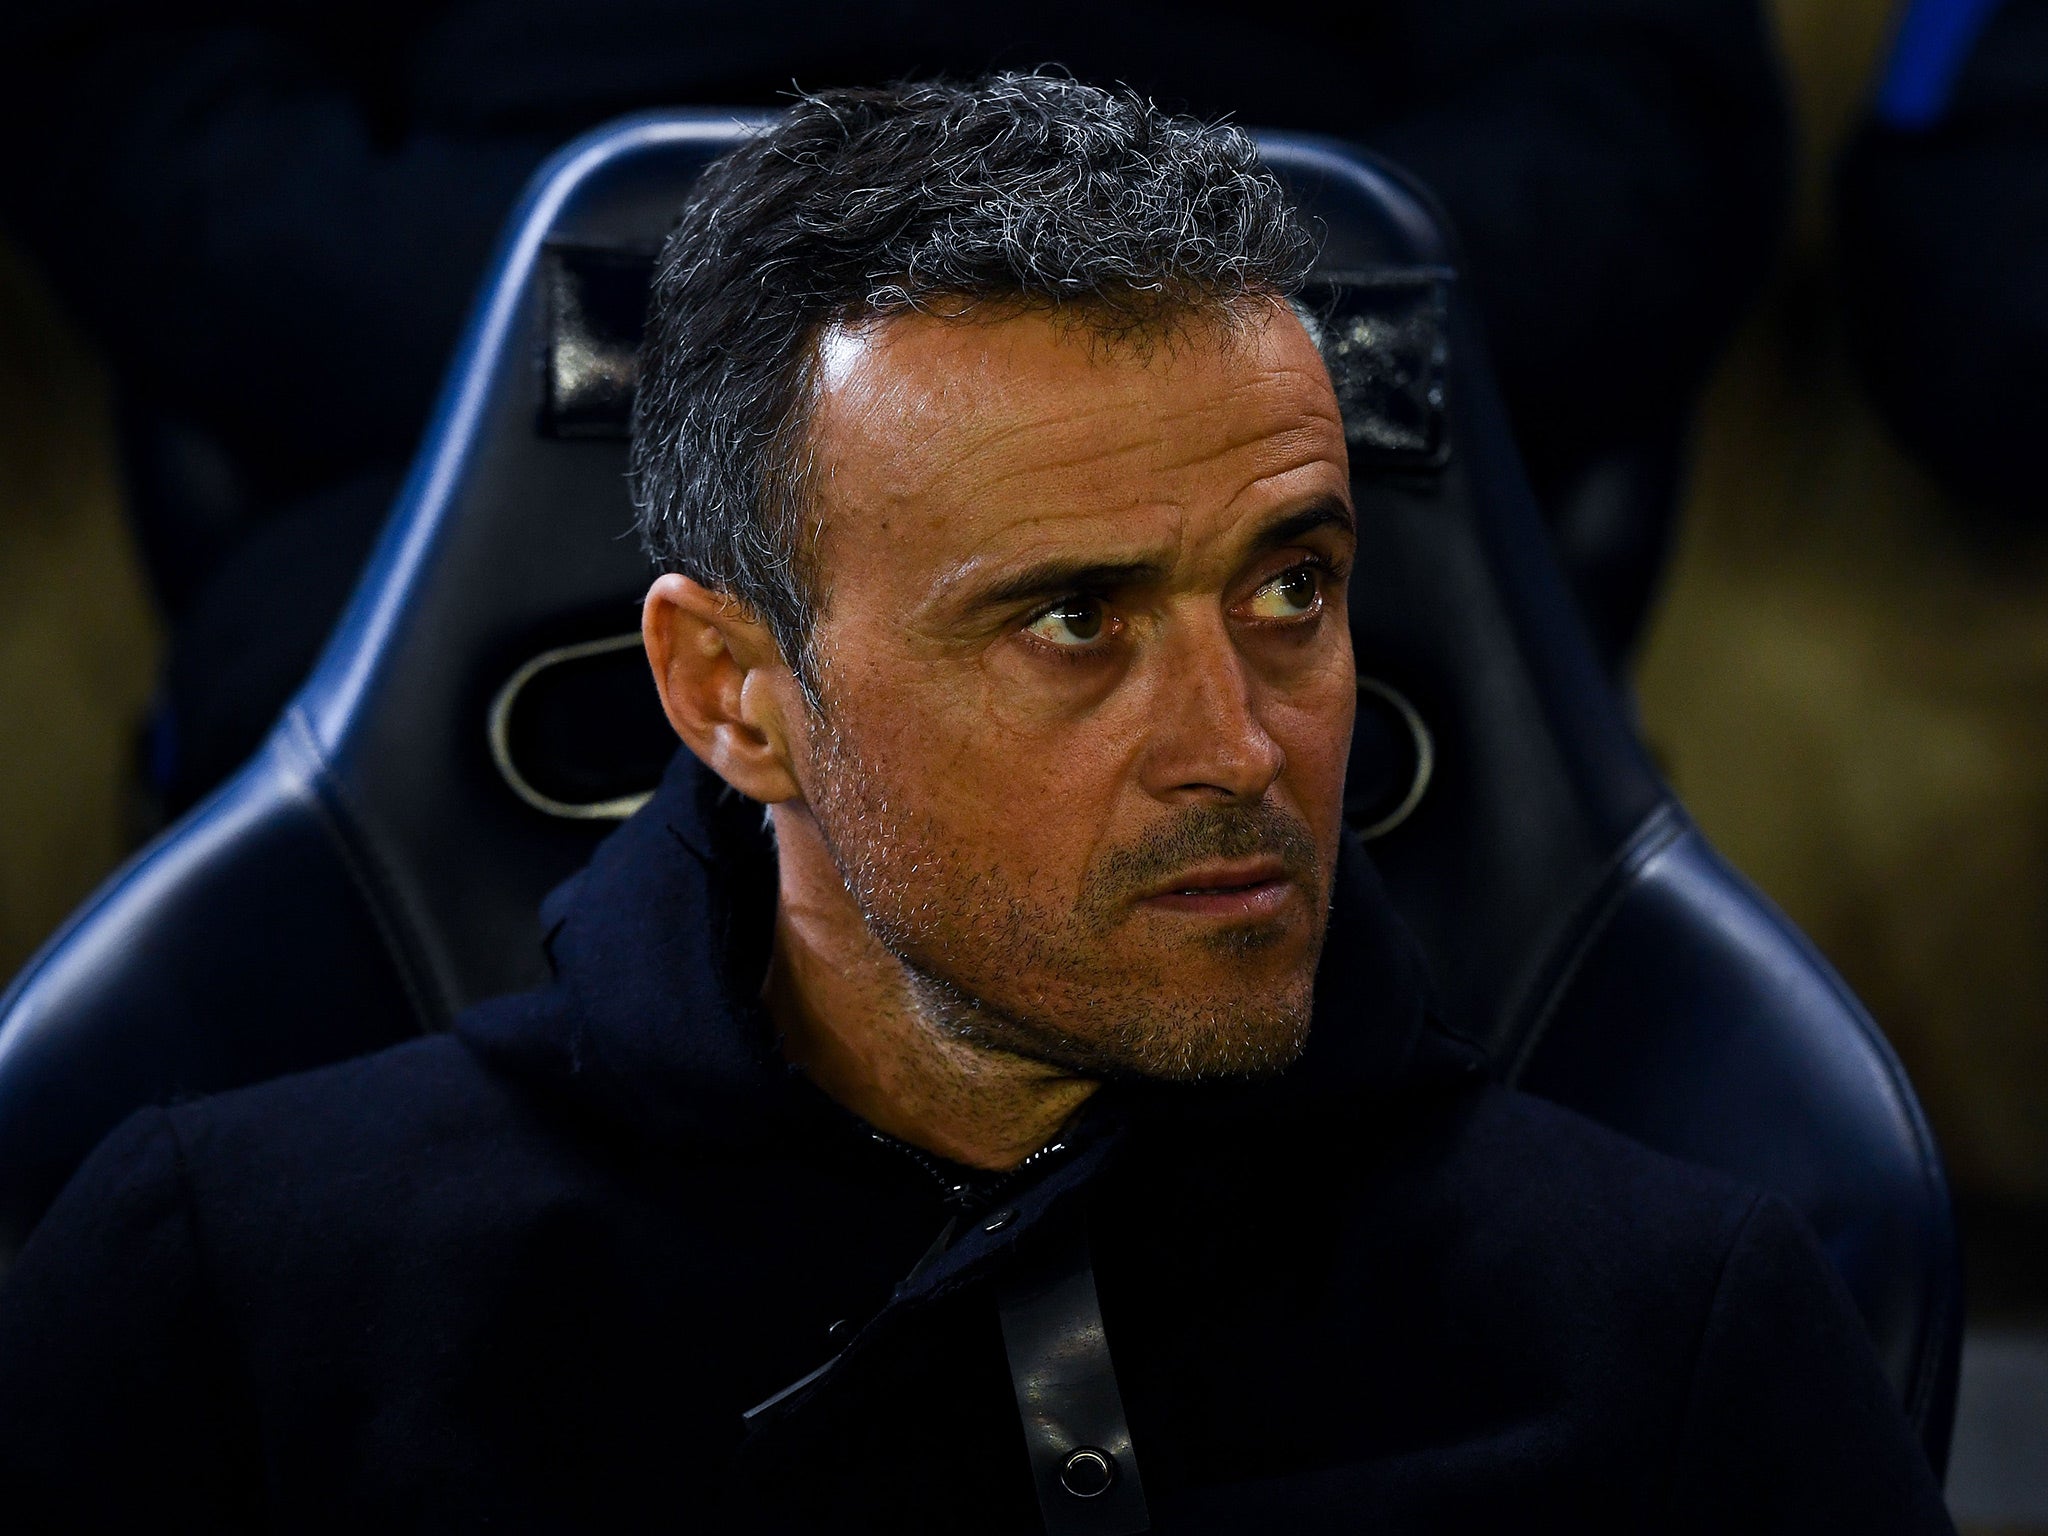 Reports in the Catalan press suggest Luis Enrique has already decided on who he would like to be succeeded by at the Nou Camp